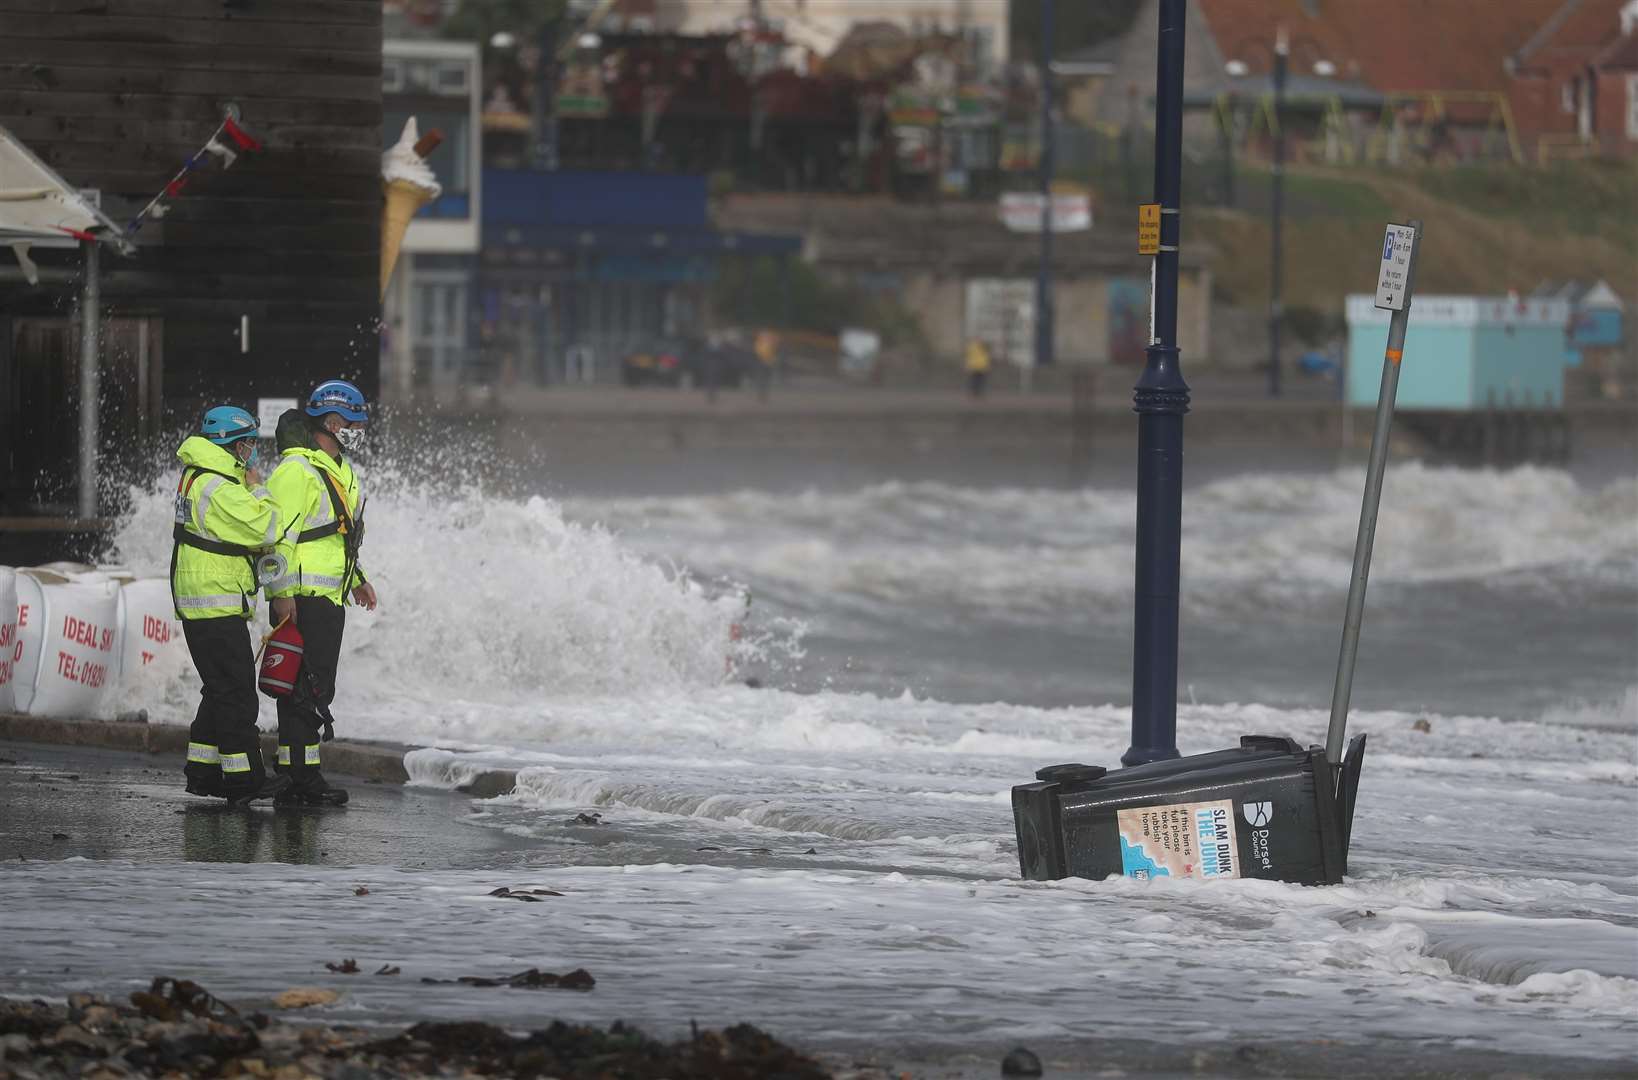 Members of the Coastguard monitor the conditions at Swanage (Steve Parsons/PA)